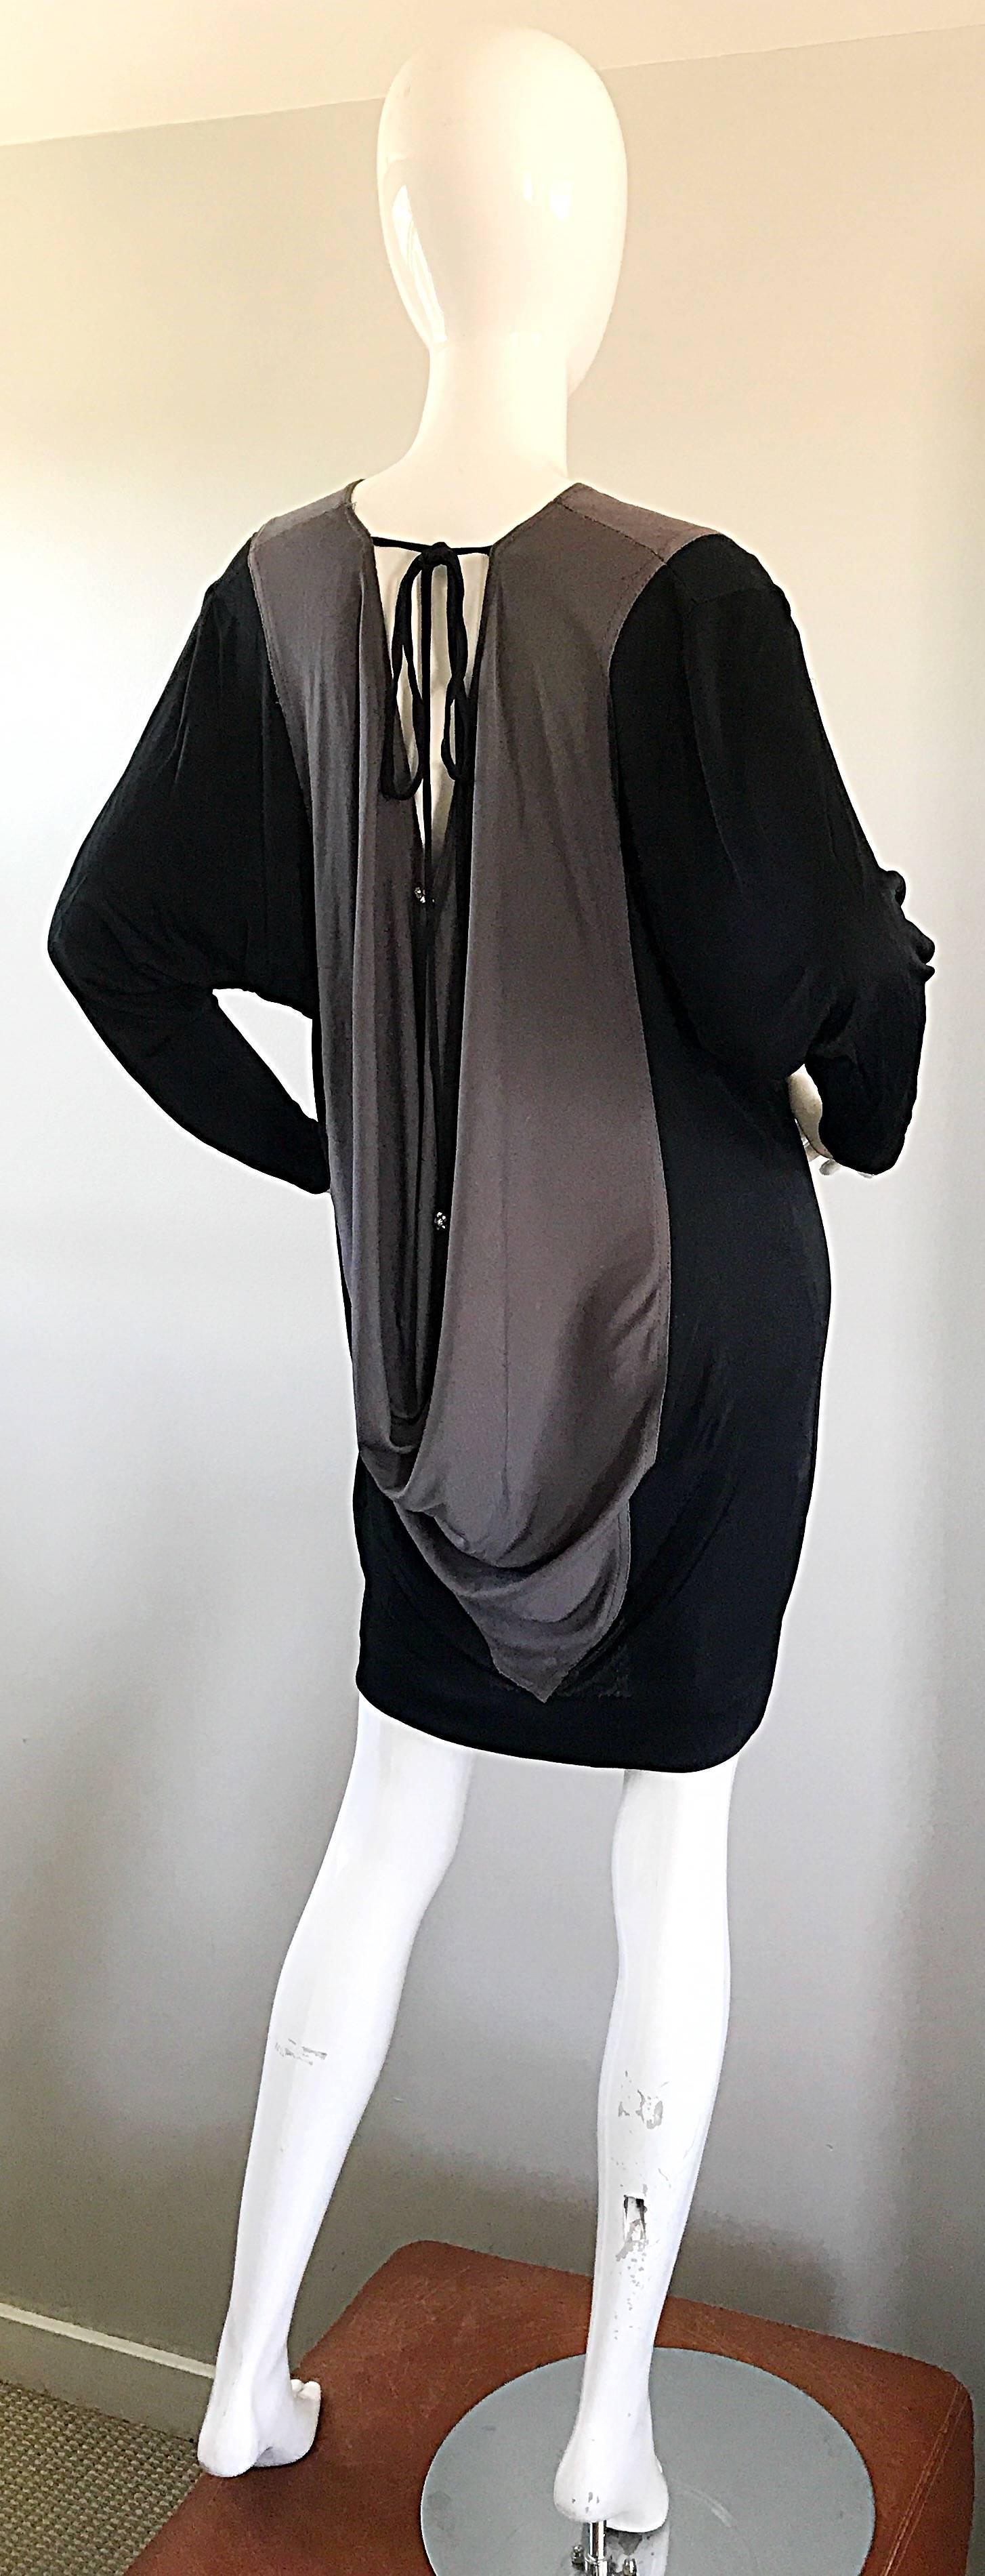 1990s C.D. Greene Black and Gray Colorblock Dolman Sleeve Vintage Jersey Dress For Sale 3